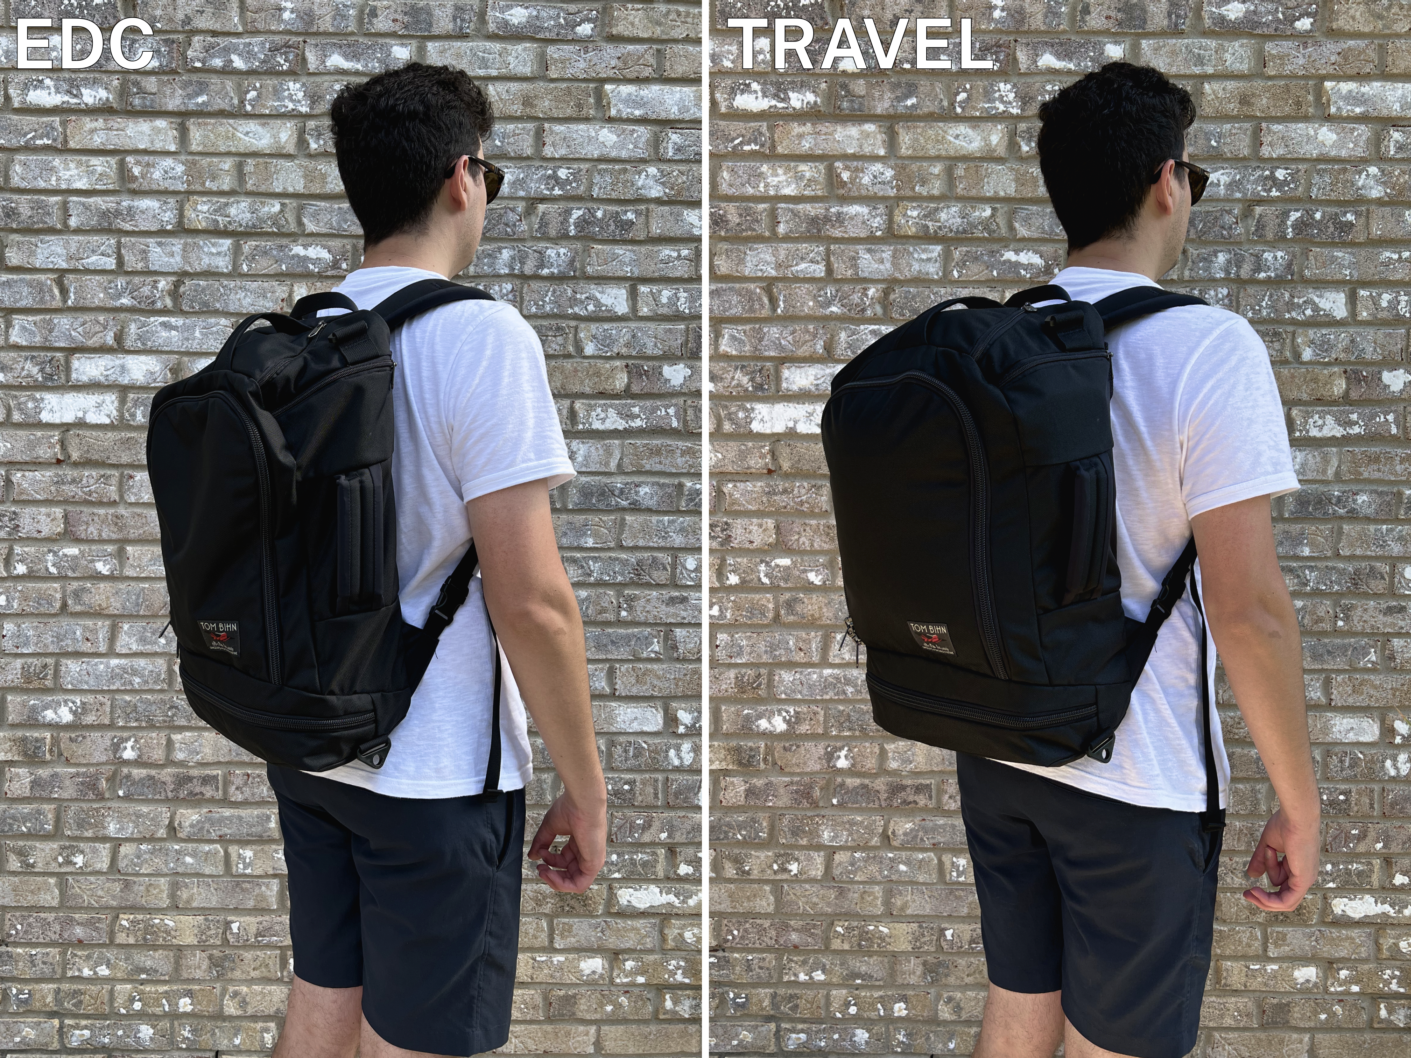 A comparison image between the Tom Bihn Techonaut holding EDC and travel items